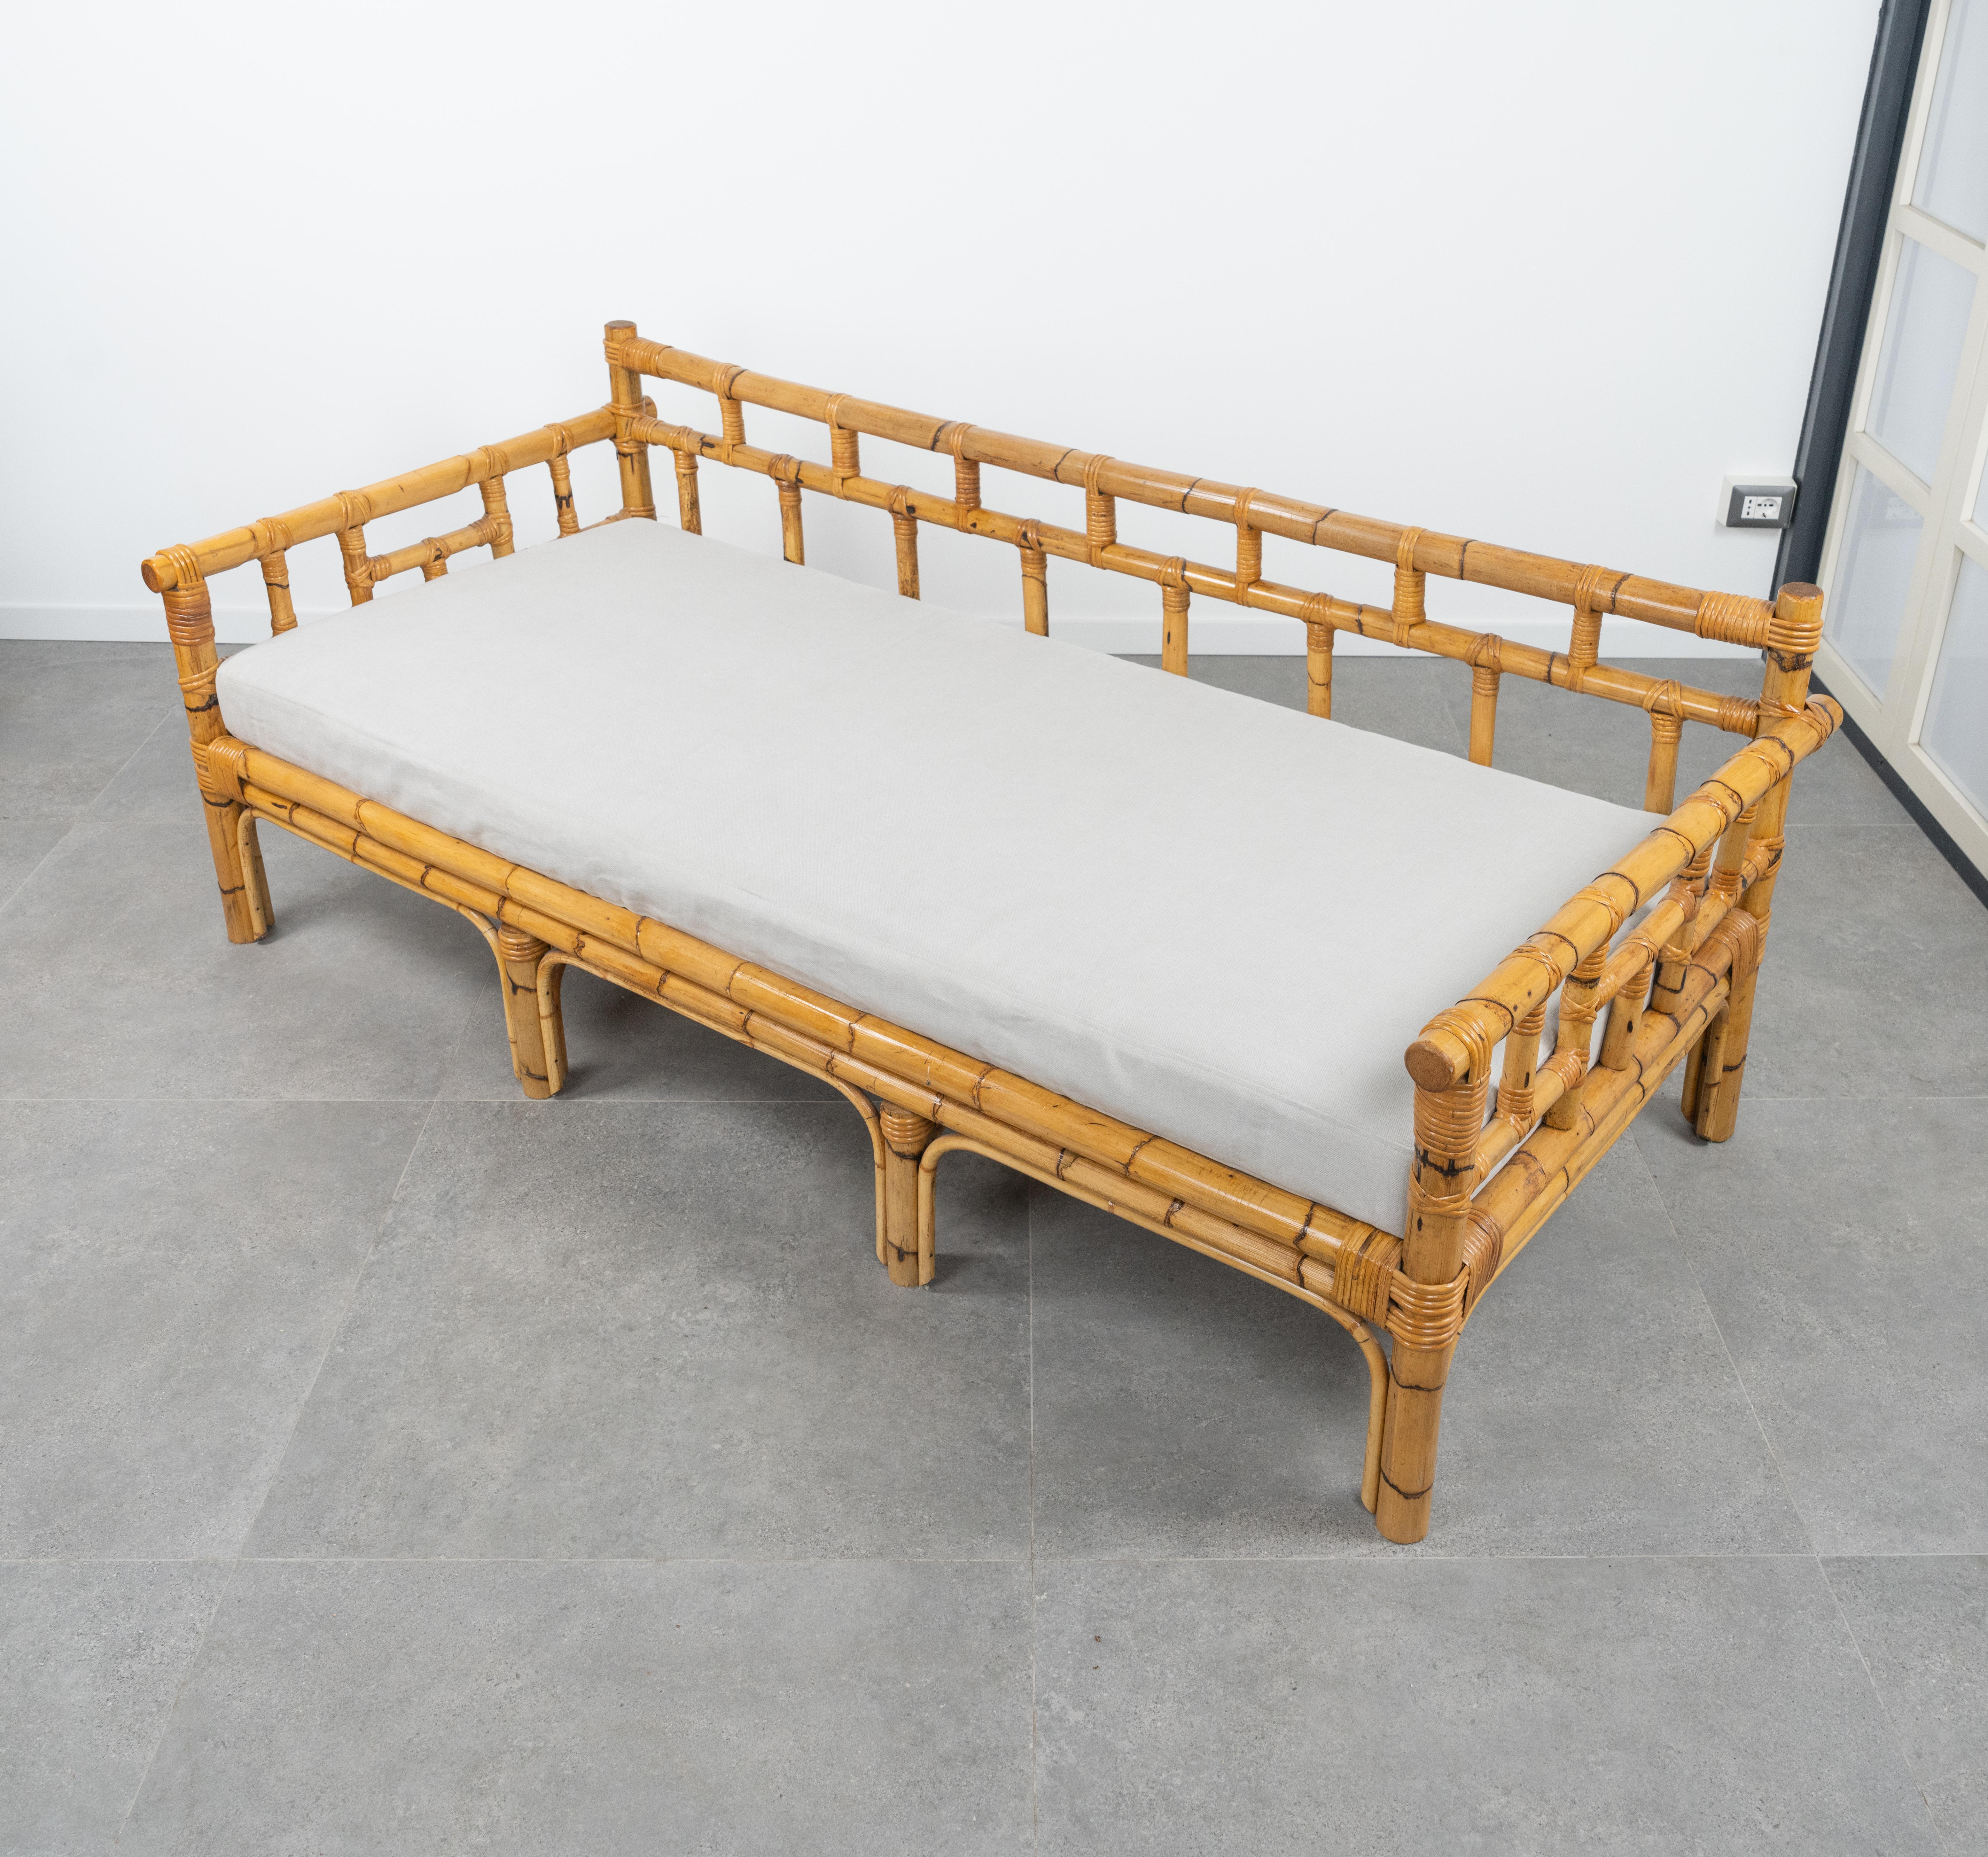 Late 20th Century Midcentury Bamboo and Rattan Three-Seat Sofa by Vivai Del Sud, Italy 1970s For Sale